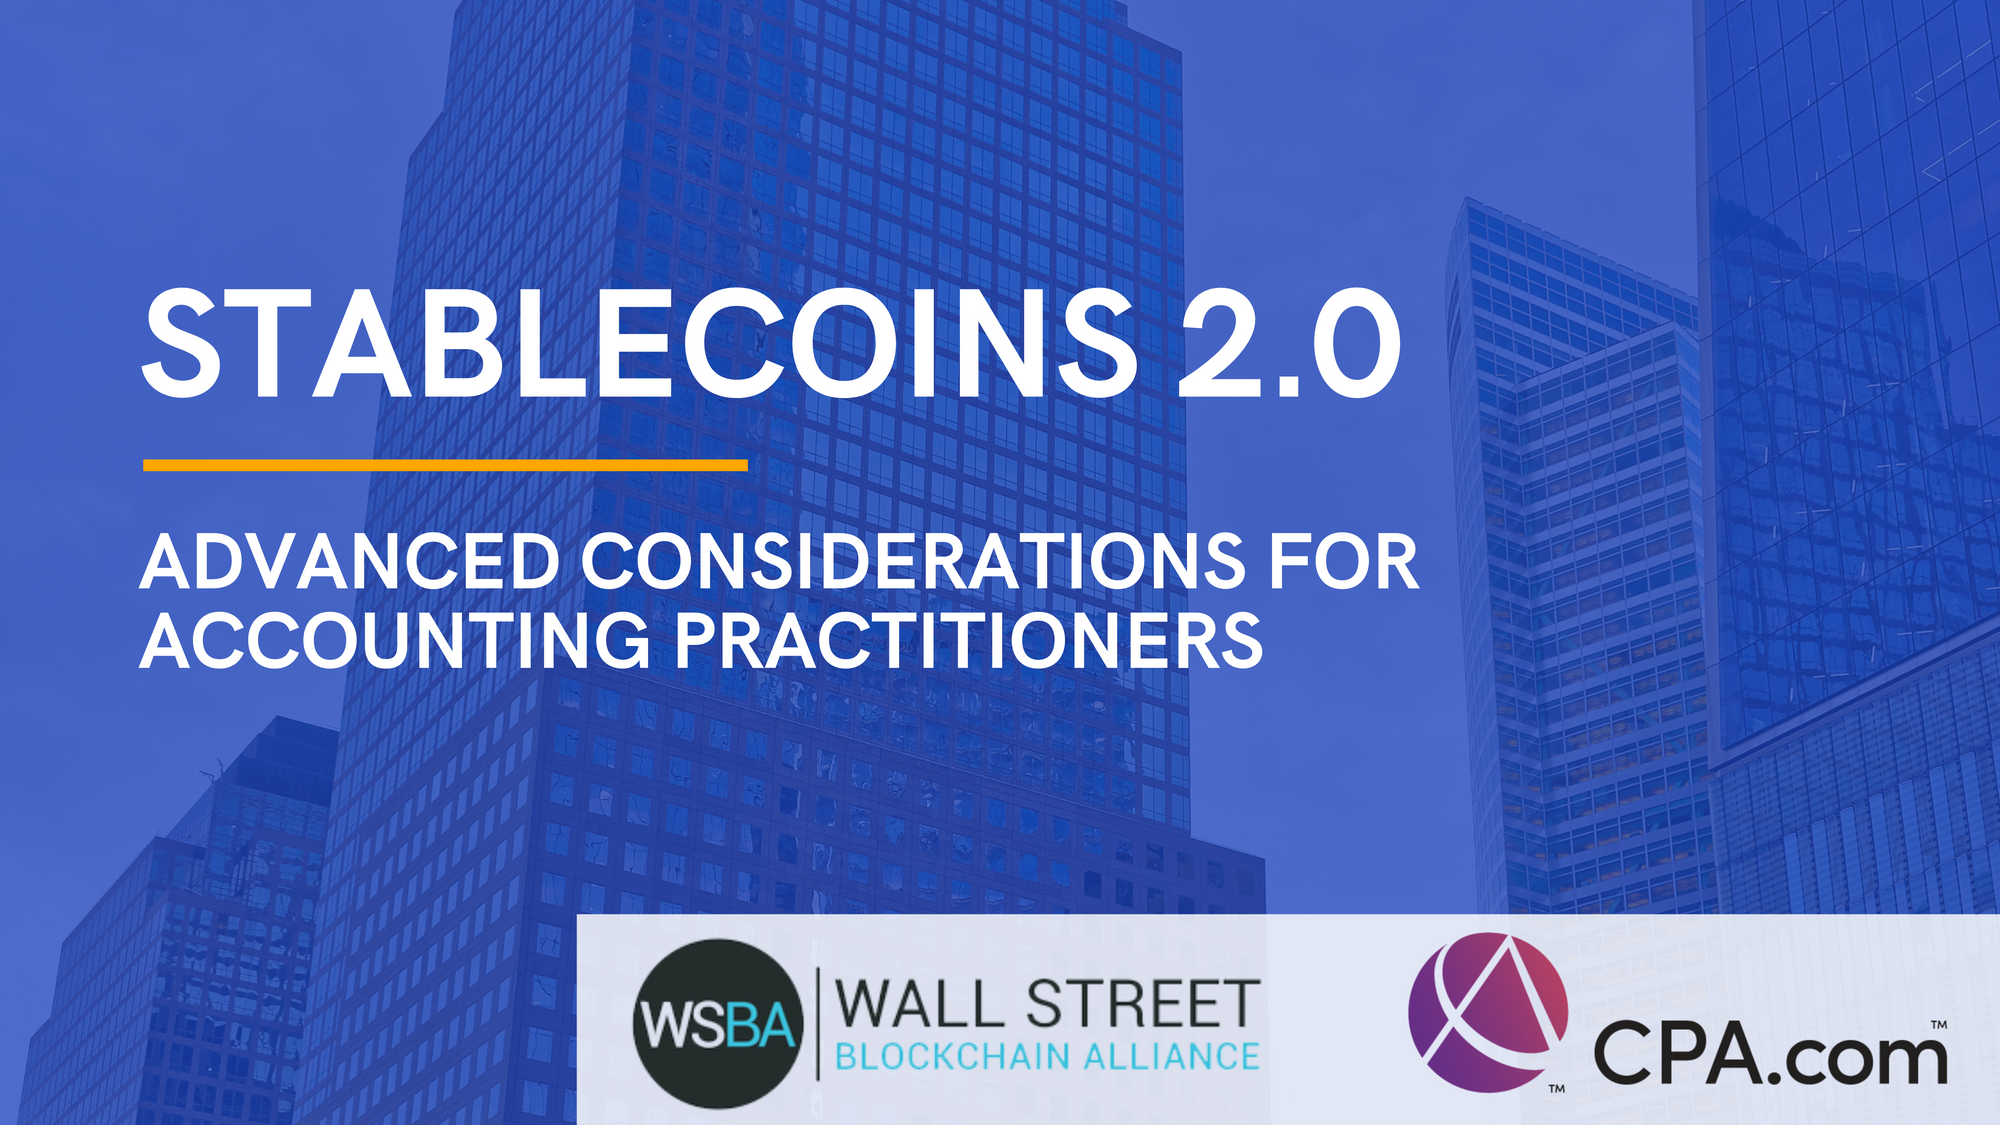 How Will Stablecoins Impact the Accounting Industry? - Stablecoins 2.0